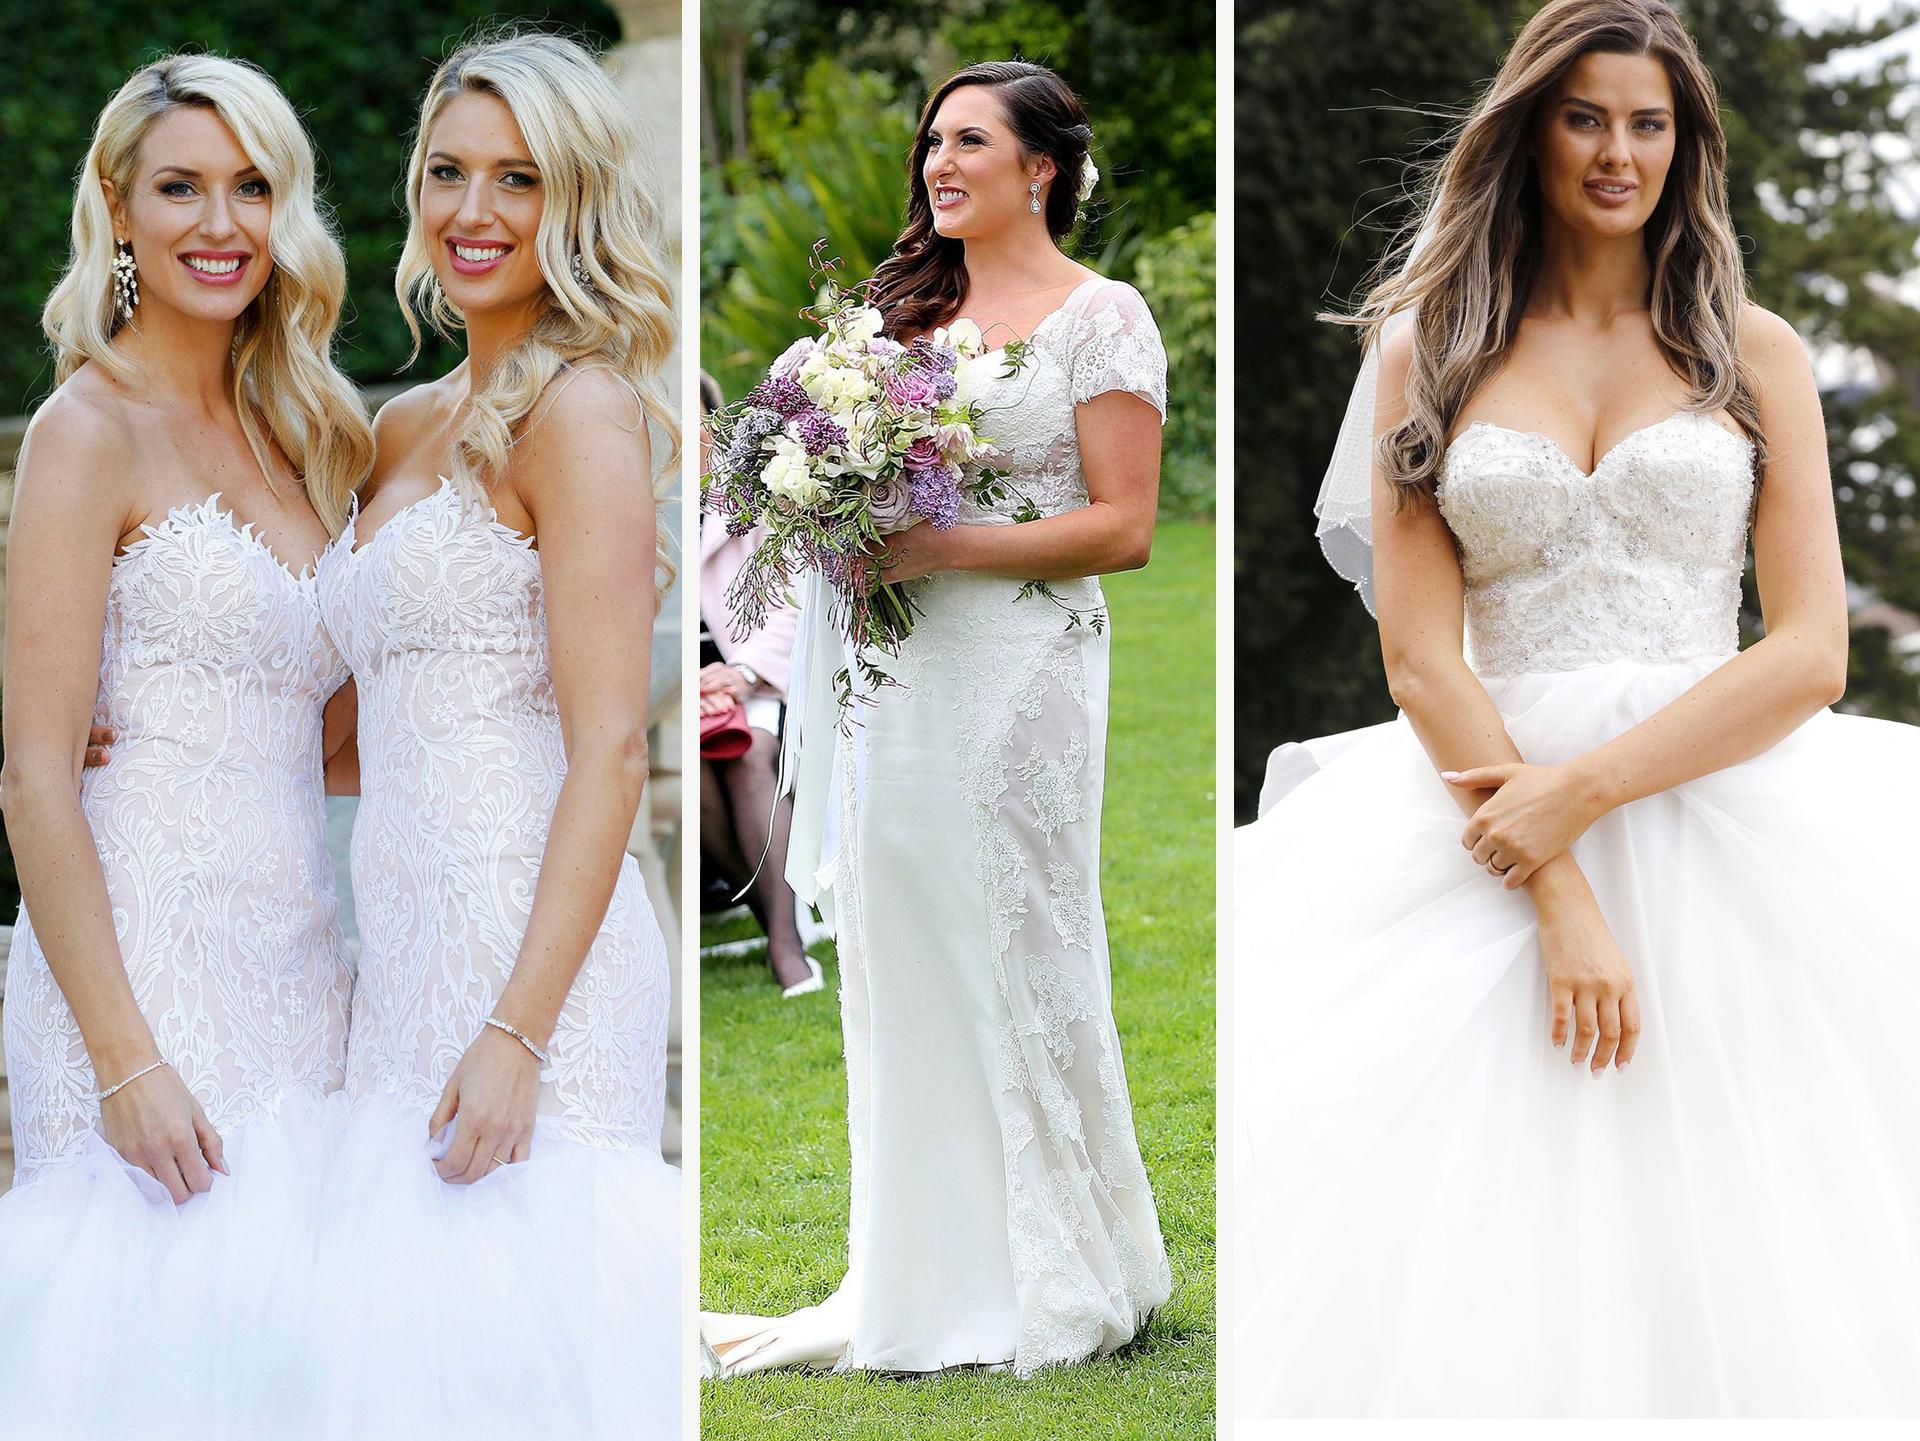 The Married At First Sight wedding dresses, ranked